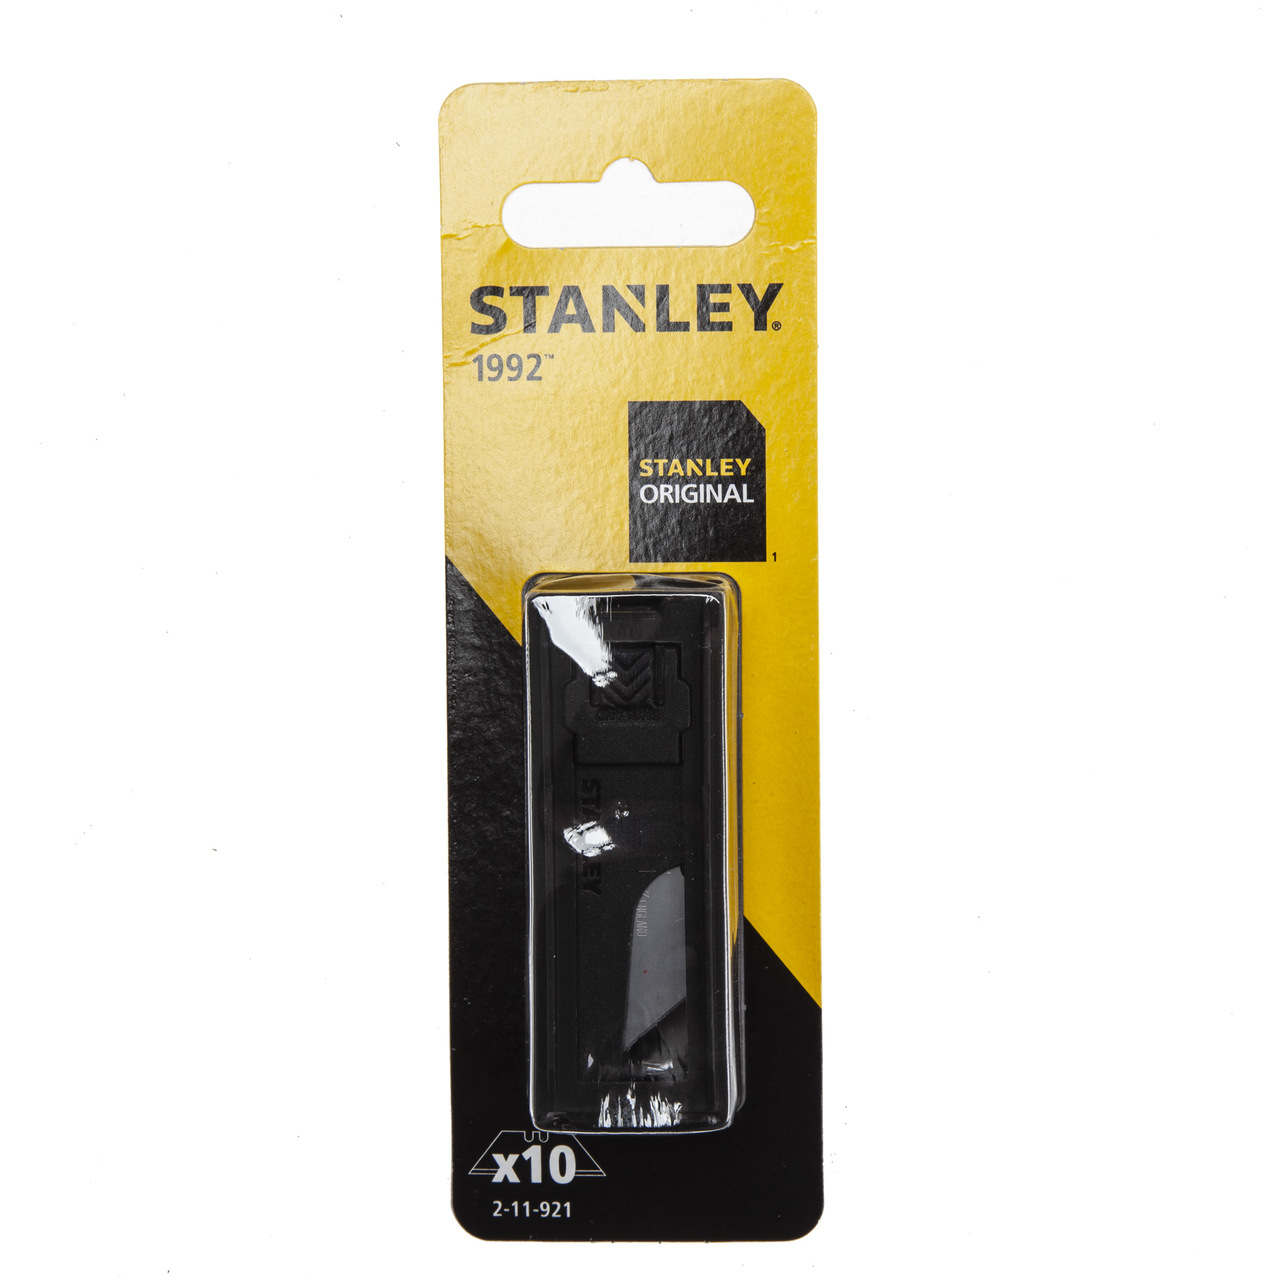 Stanley No.1992 Utility Blades (Pack of 10)